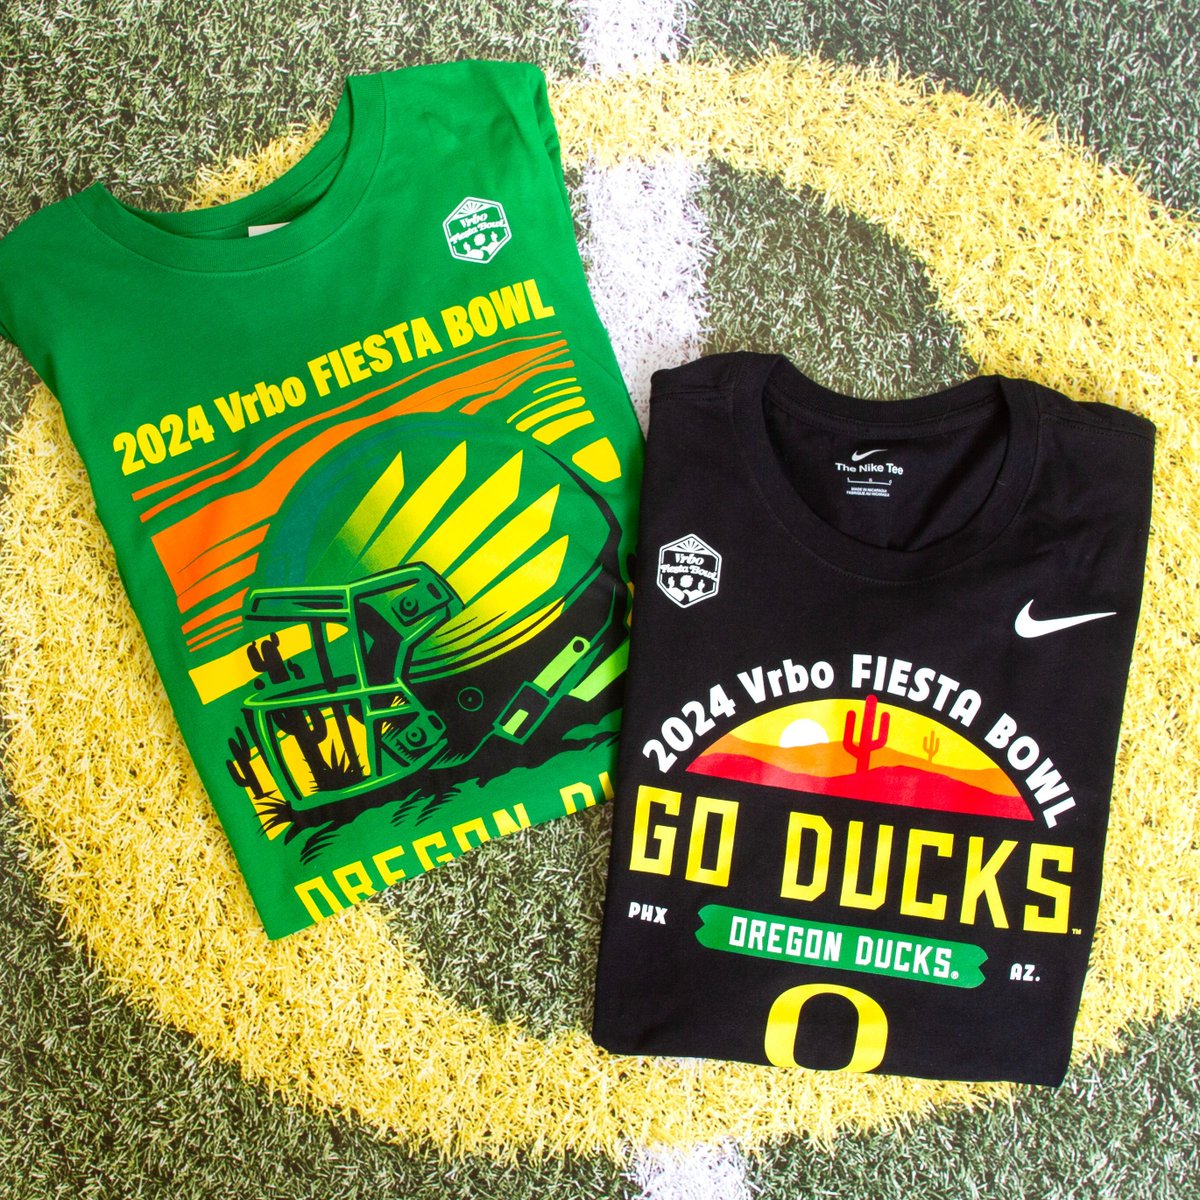 Gear up with the latest arrivals for the 2024 Vrbo Fiesta Bowl 🎉 🏈 🦆: tds.tw/VrboFiestaBowl… #VrboFiestaBowl #GoDucks